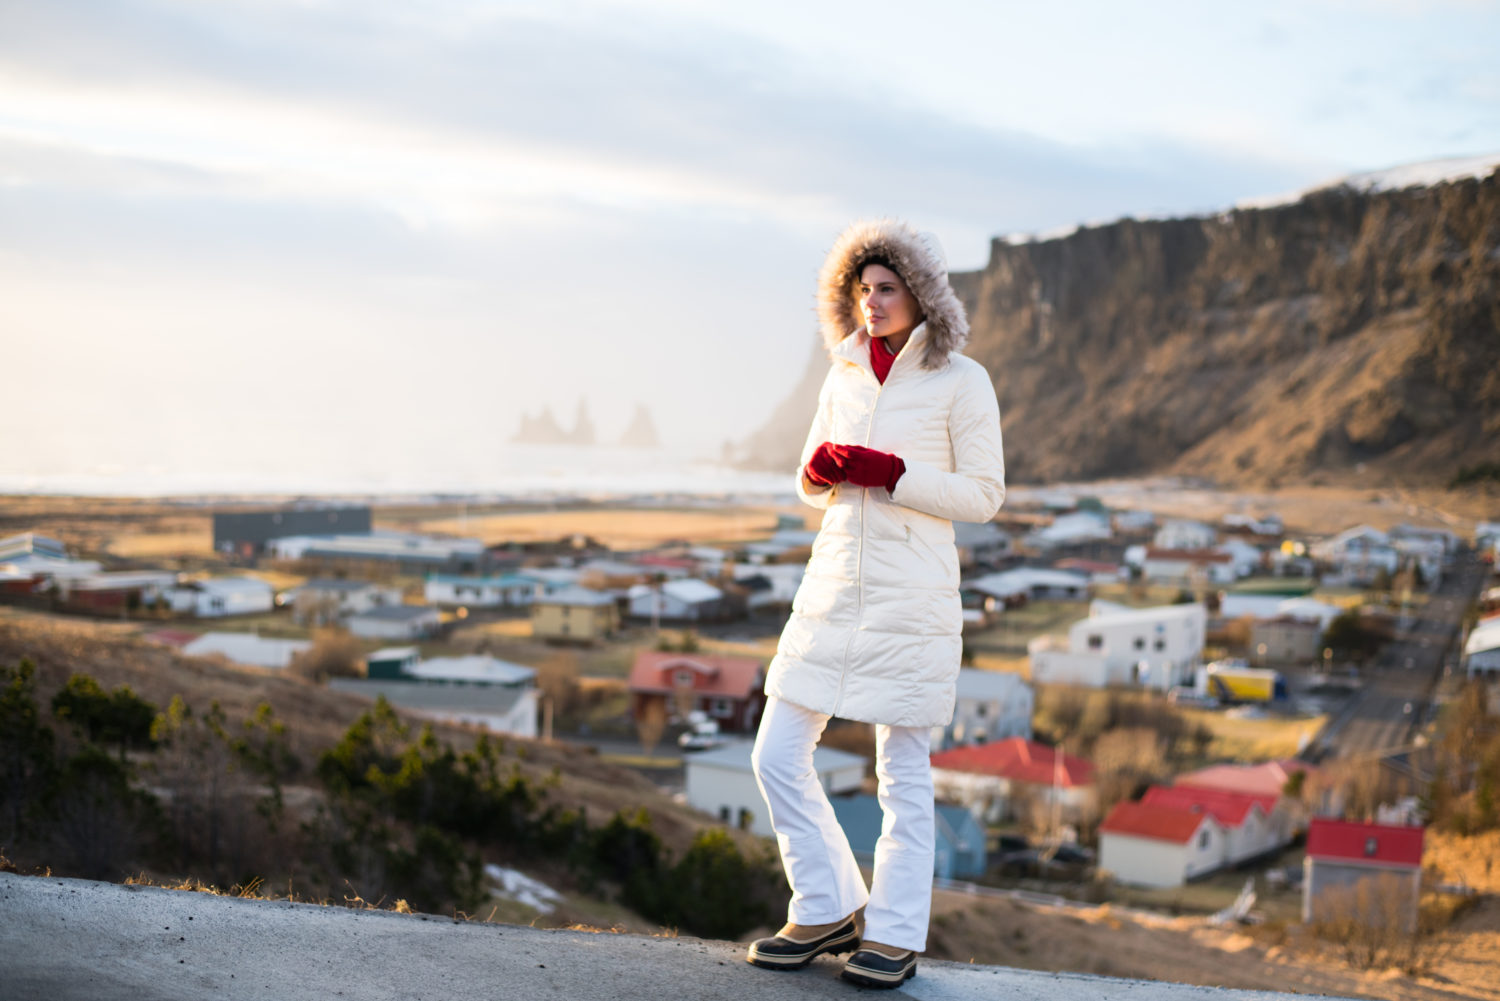 Miss USA 2011 Alyssa Campanella of The A List blog wearing Ellen Tracy faux fur coat and Sorel Caribou boots in Iceland